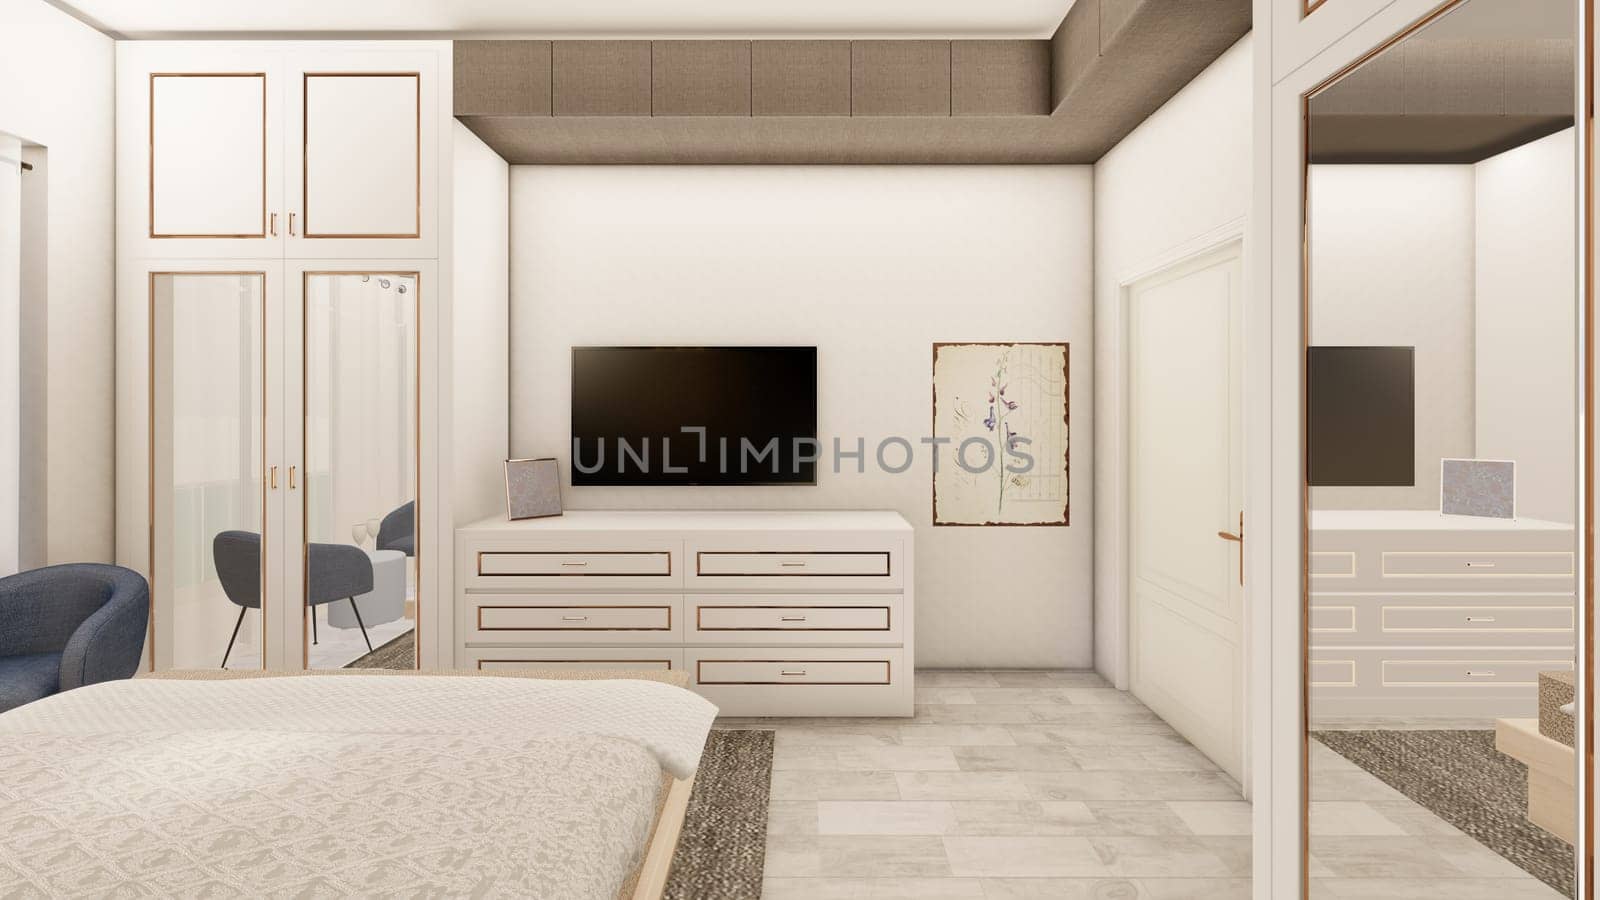 Realistic bedroom interior design with wooden furniture 3d rendering by shawlinmohd